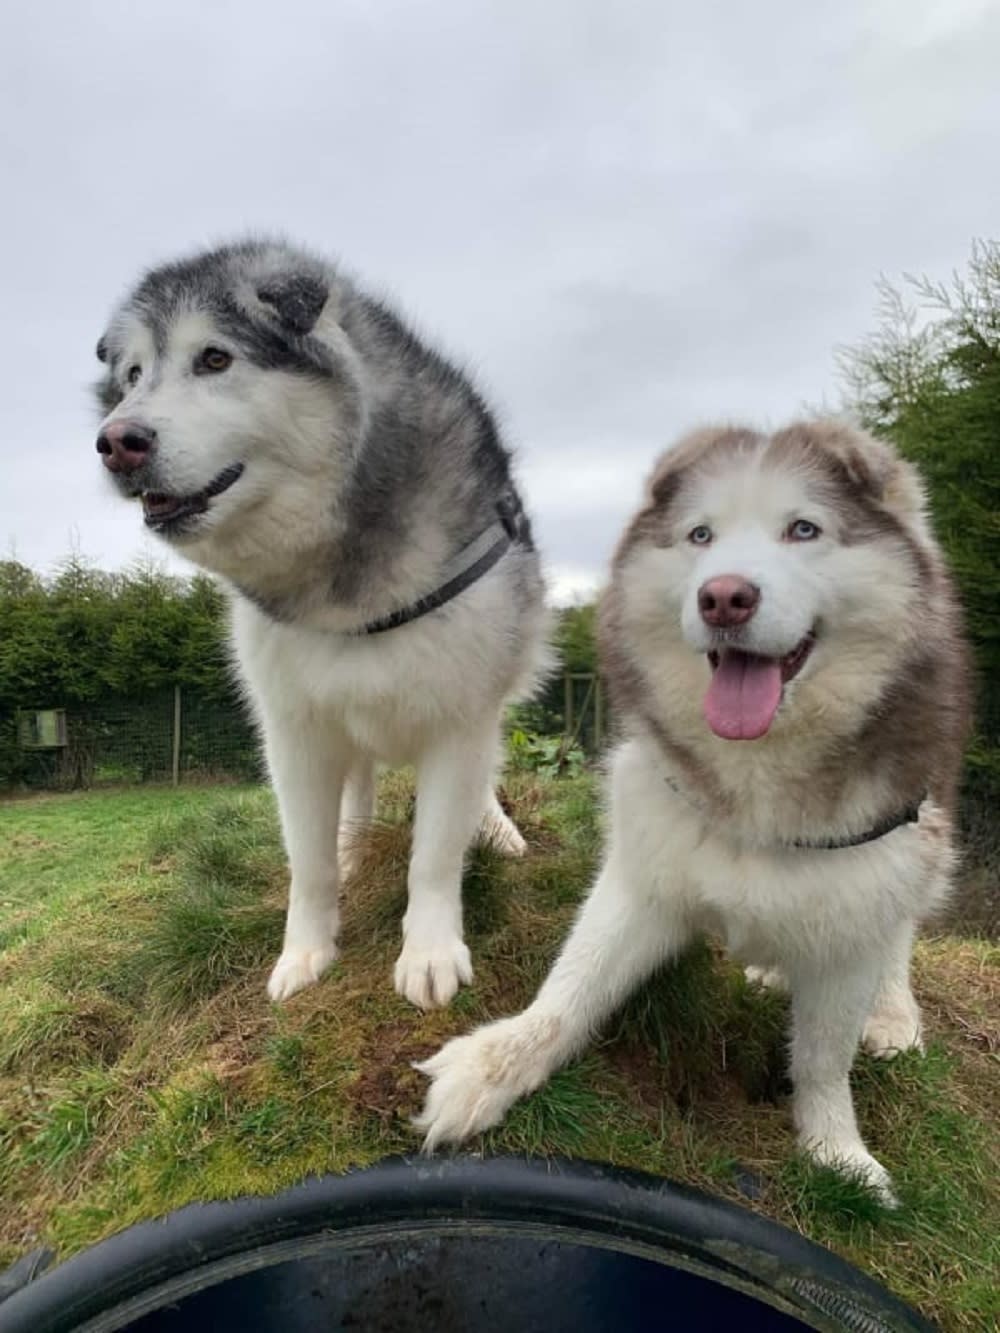 Dogs standing next to each other